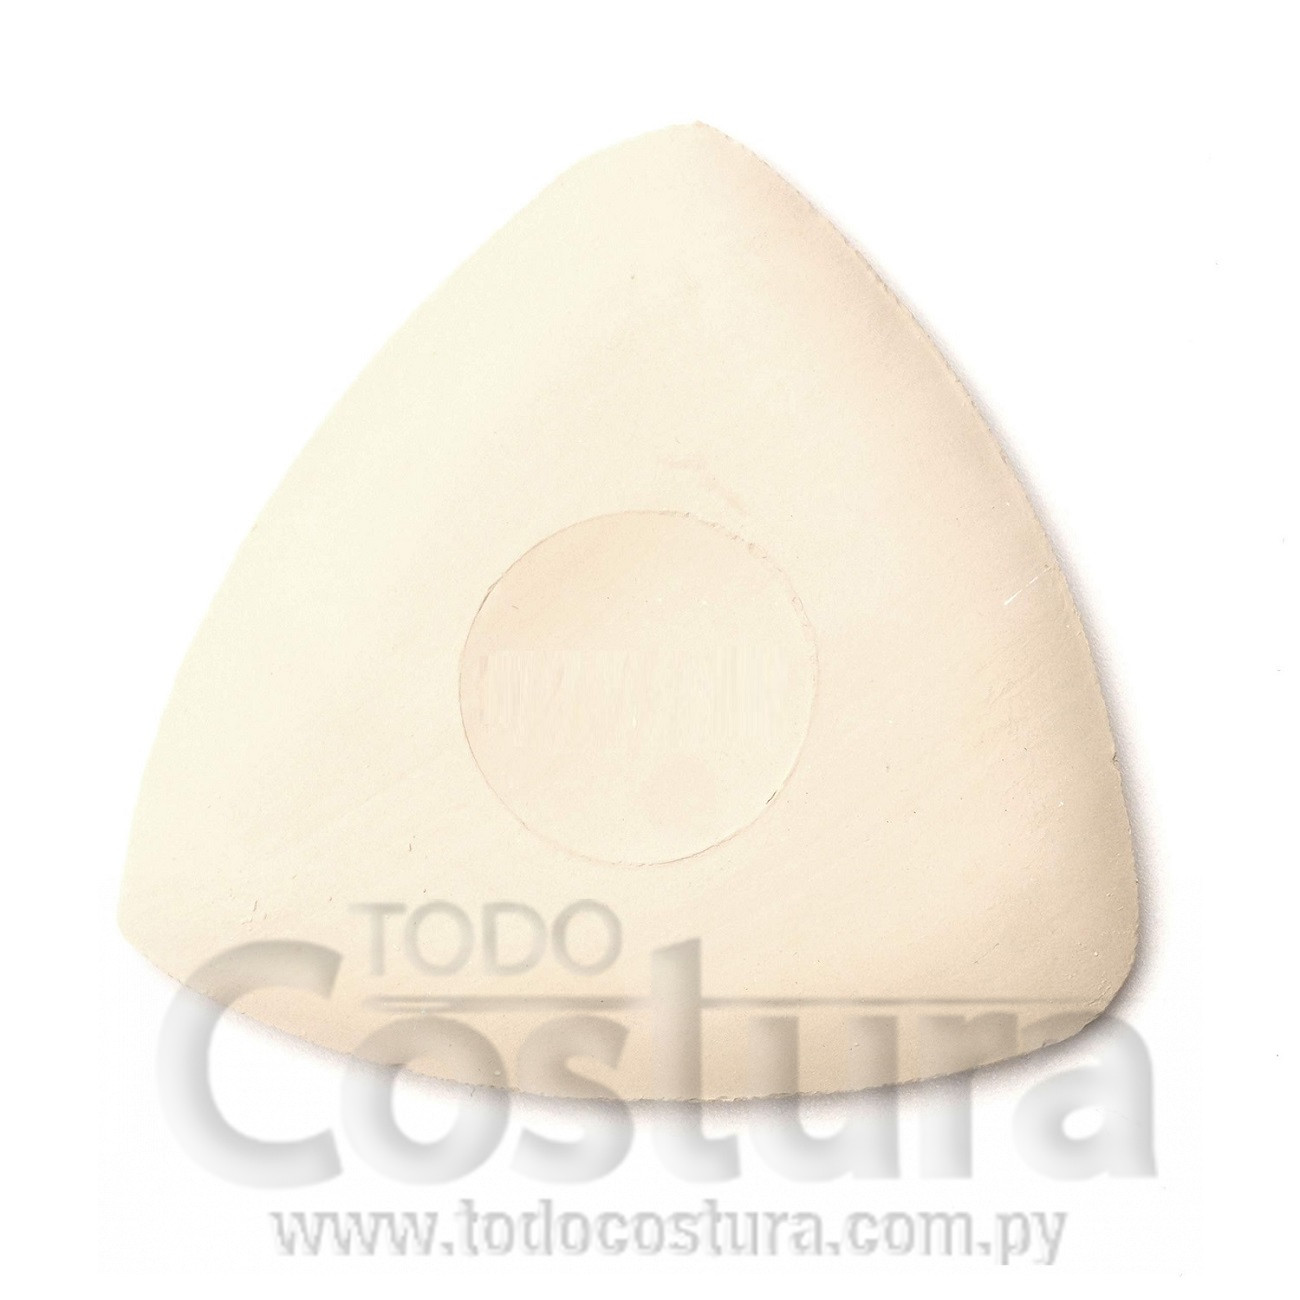 https://todocostura.com.py/images/products/14436/14436.jpg